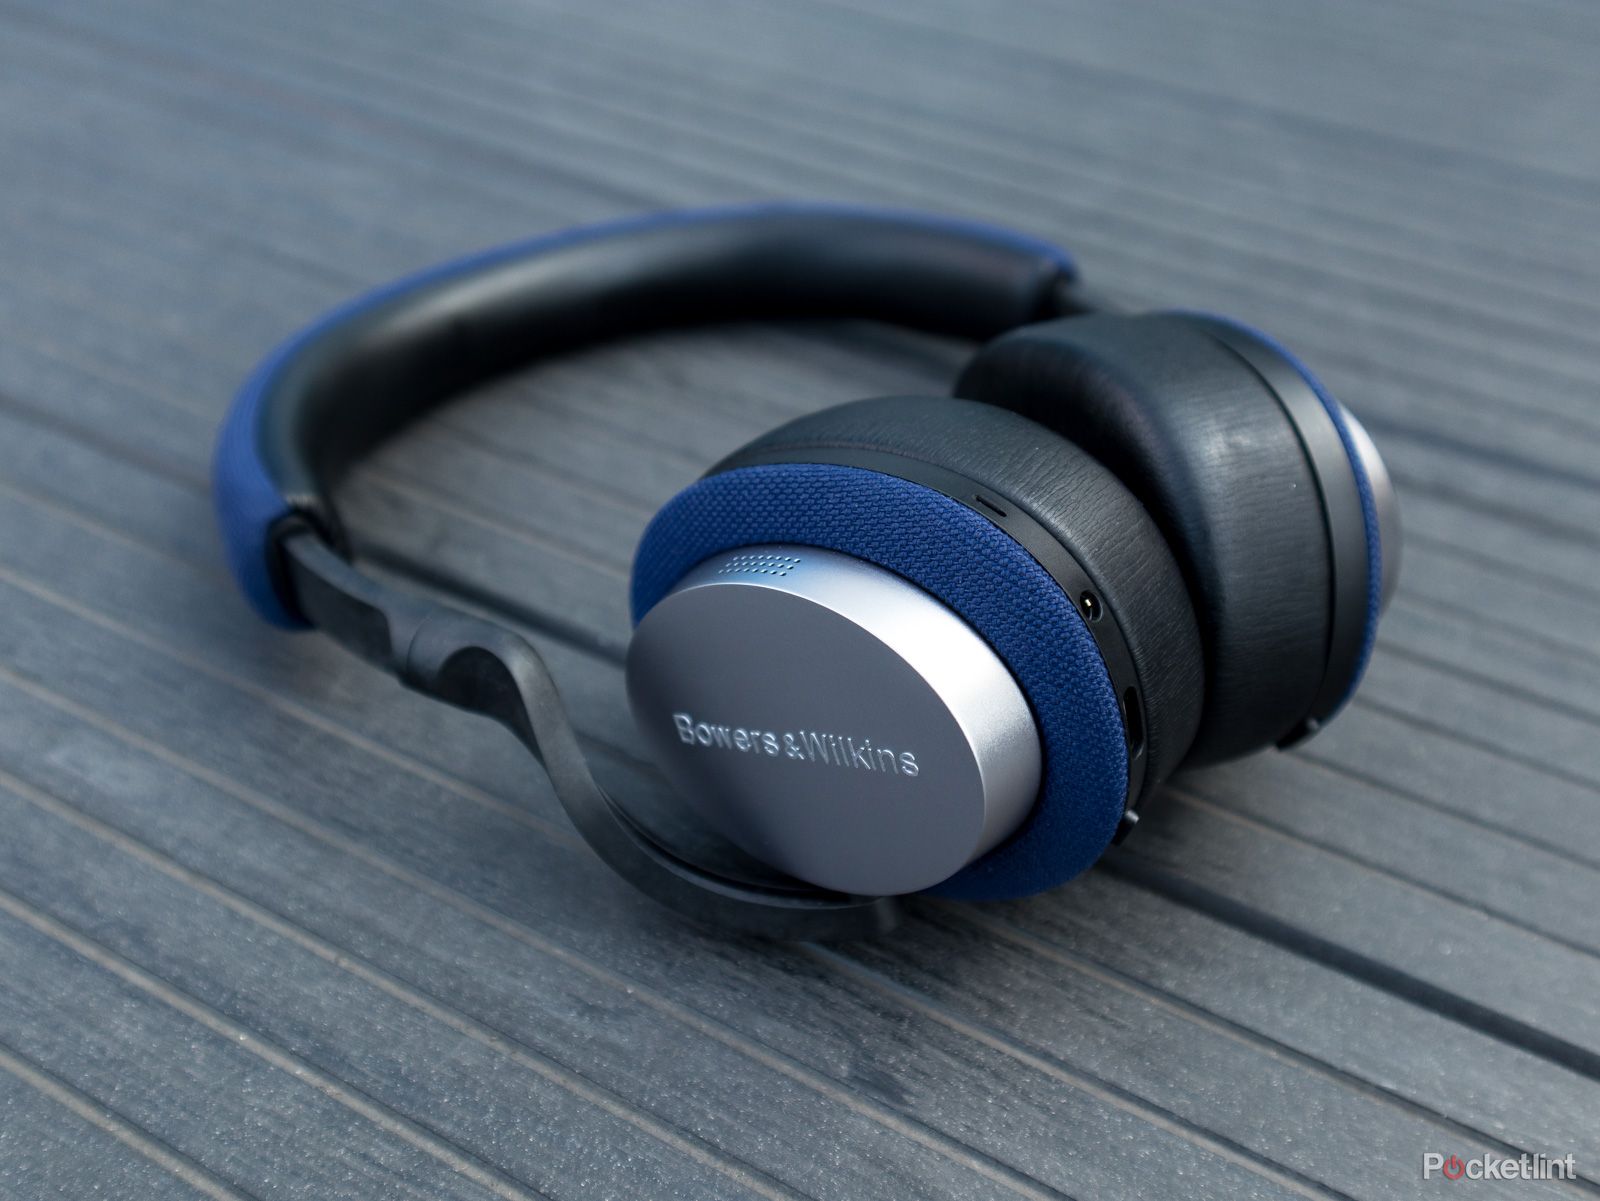 Bowers Wilkins Px7 Leads New Wireless Headphones Range Also Includes Neckband Models image 2